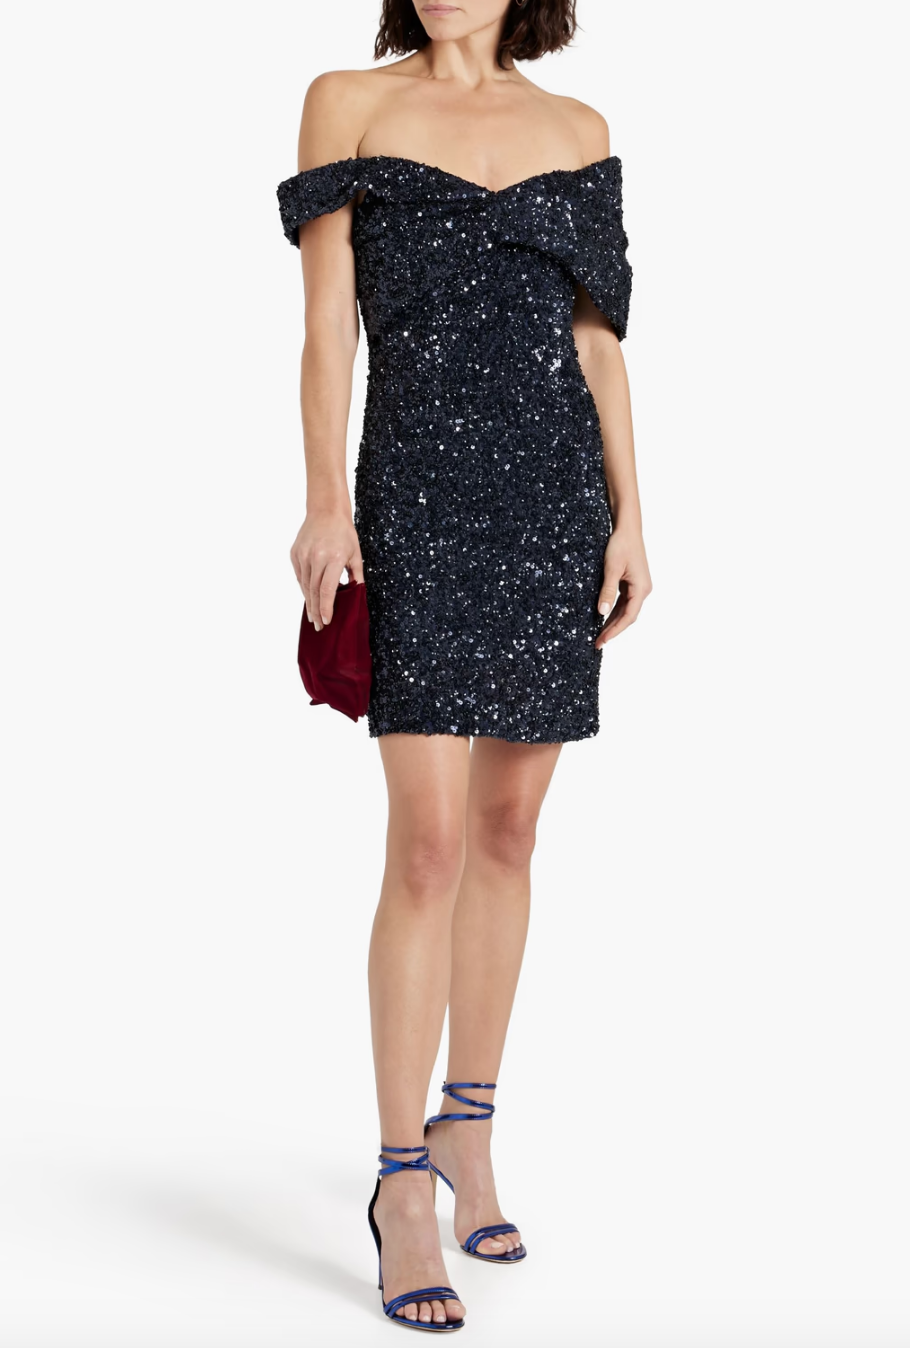 Crystal Kung Minkoff's Navy Sequin Confessional Dress